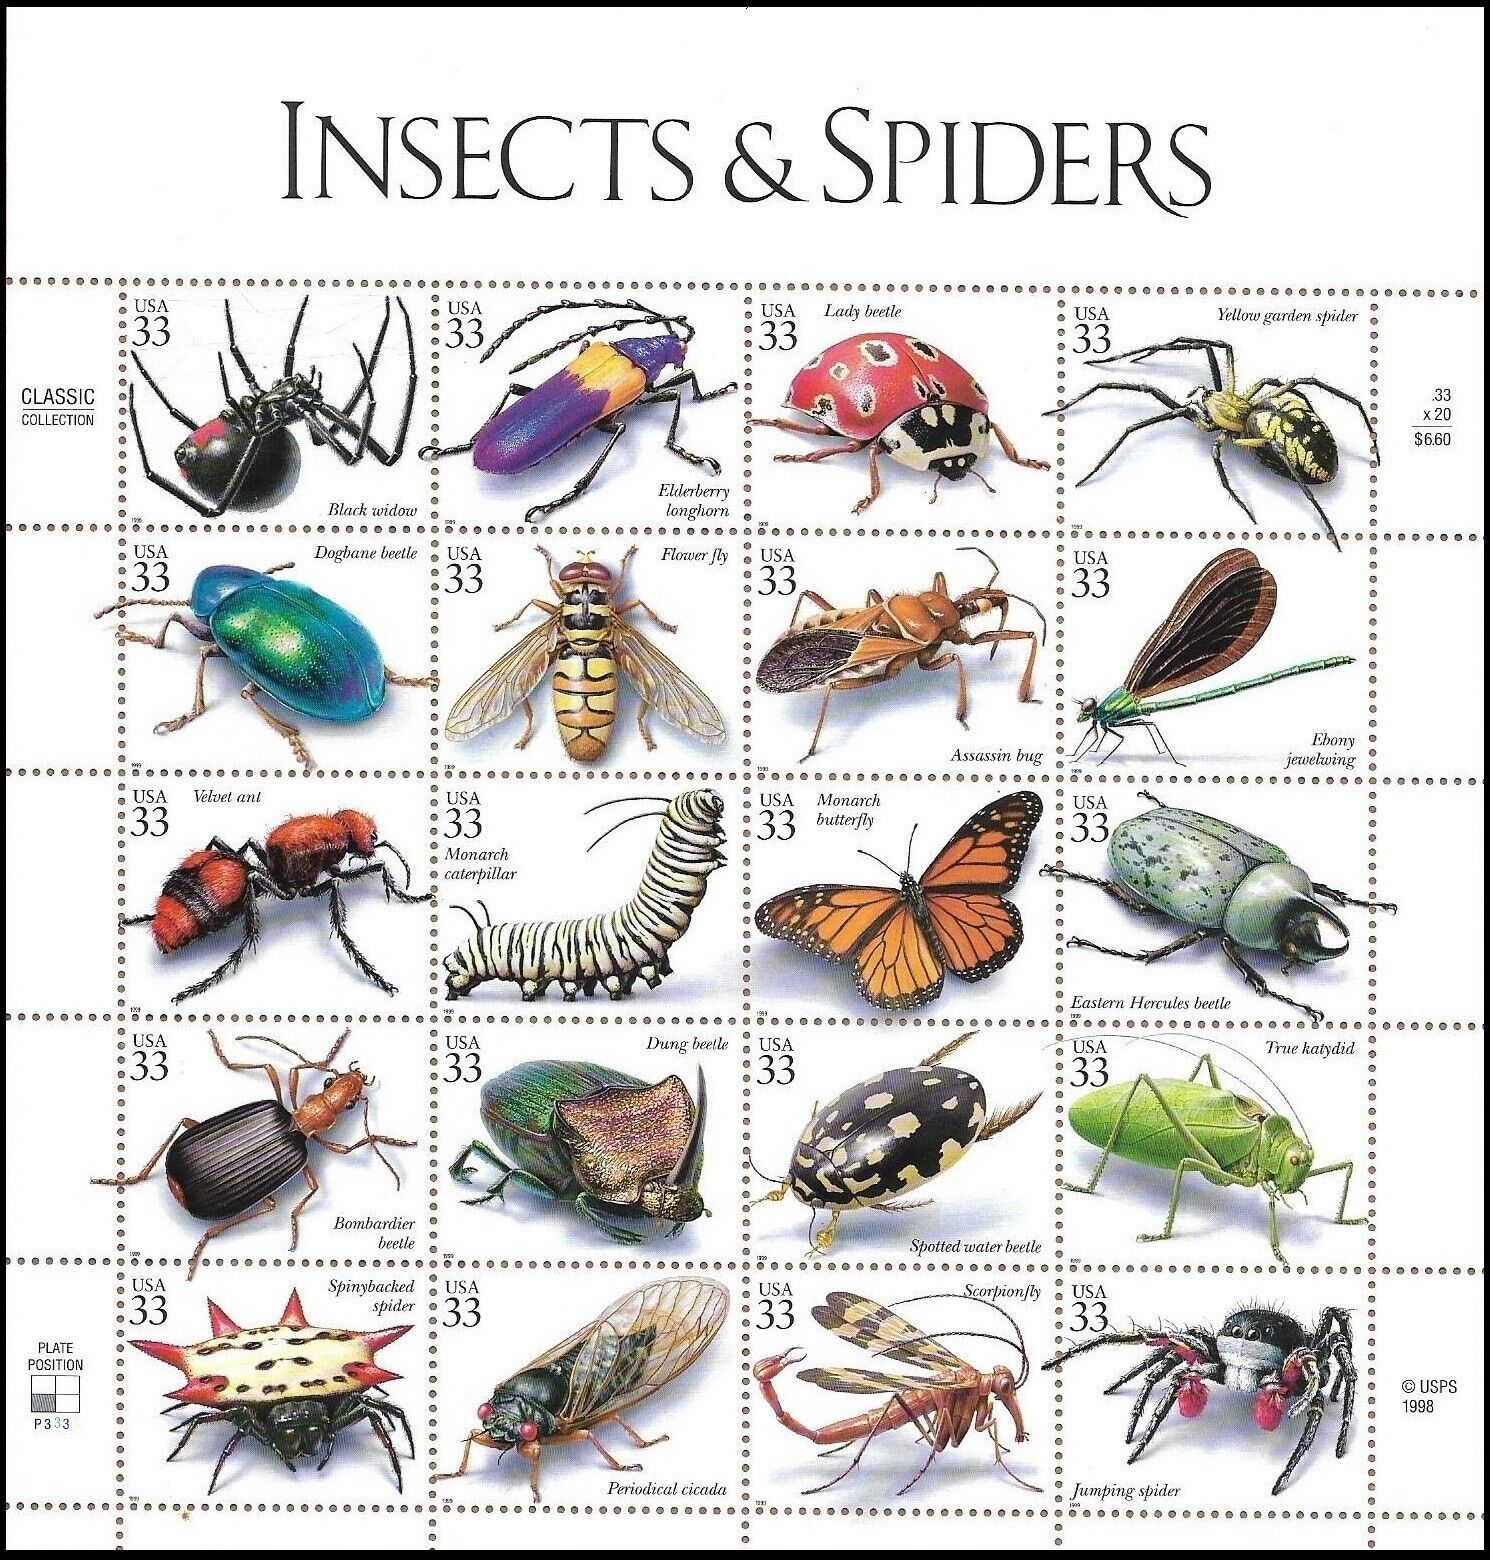 USPS 1998 Full Sheet Insects & Spiders Postage Stamps $.33 stamp + bio on back - $9.45